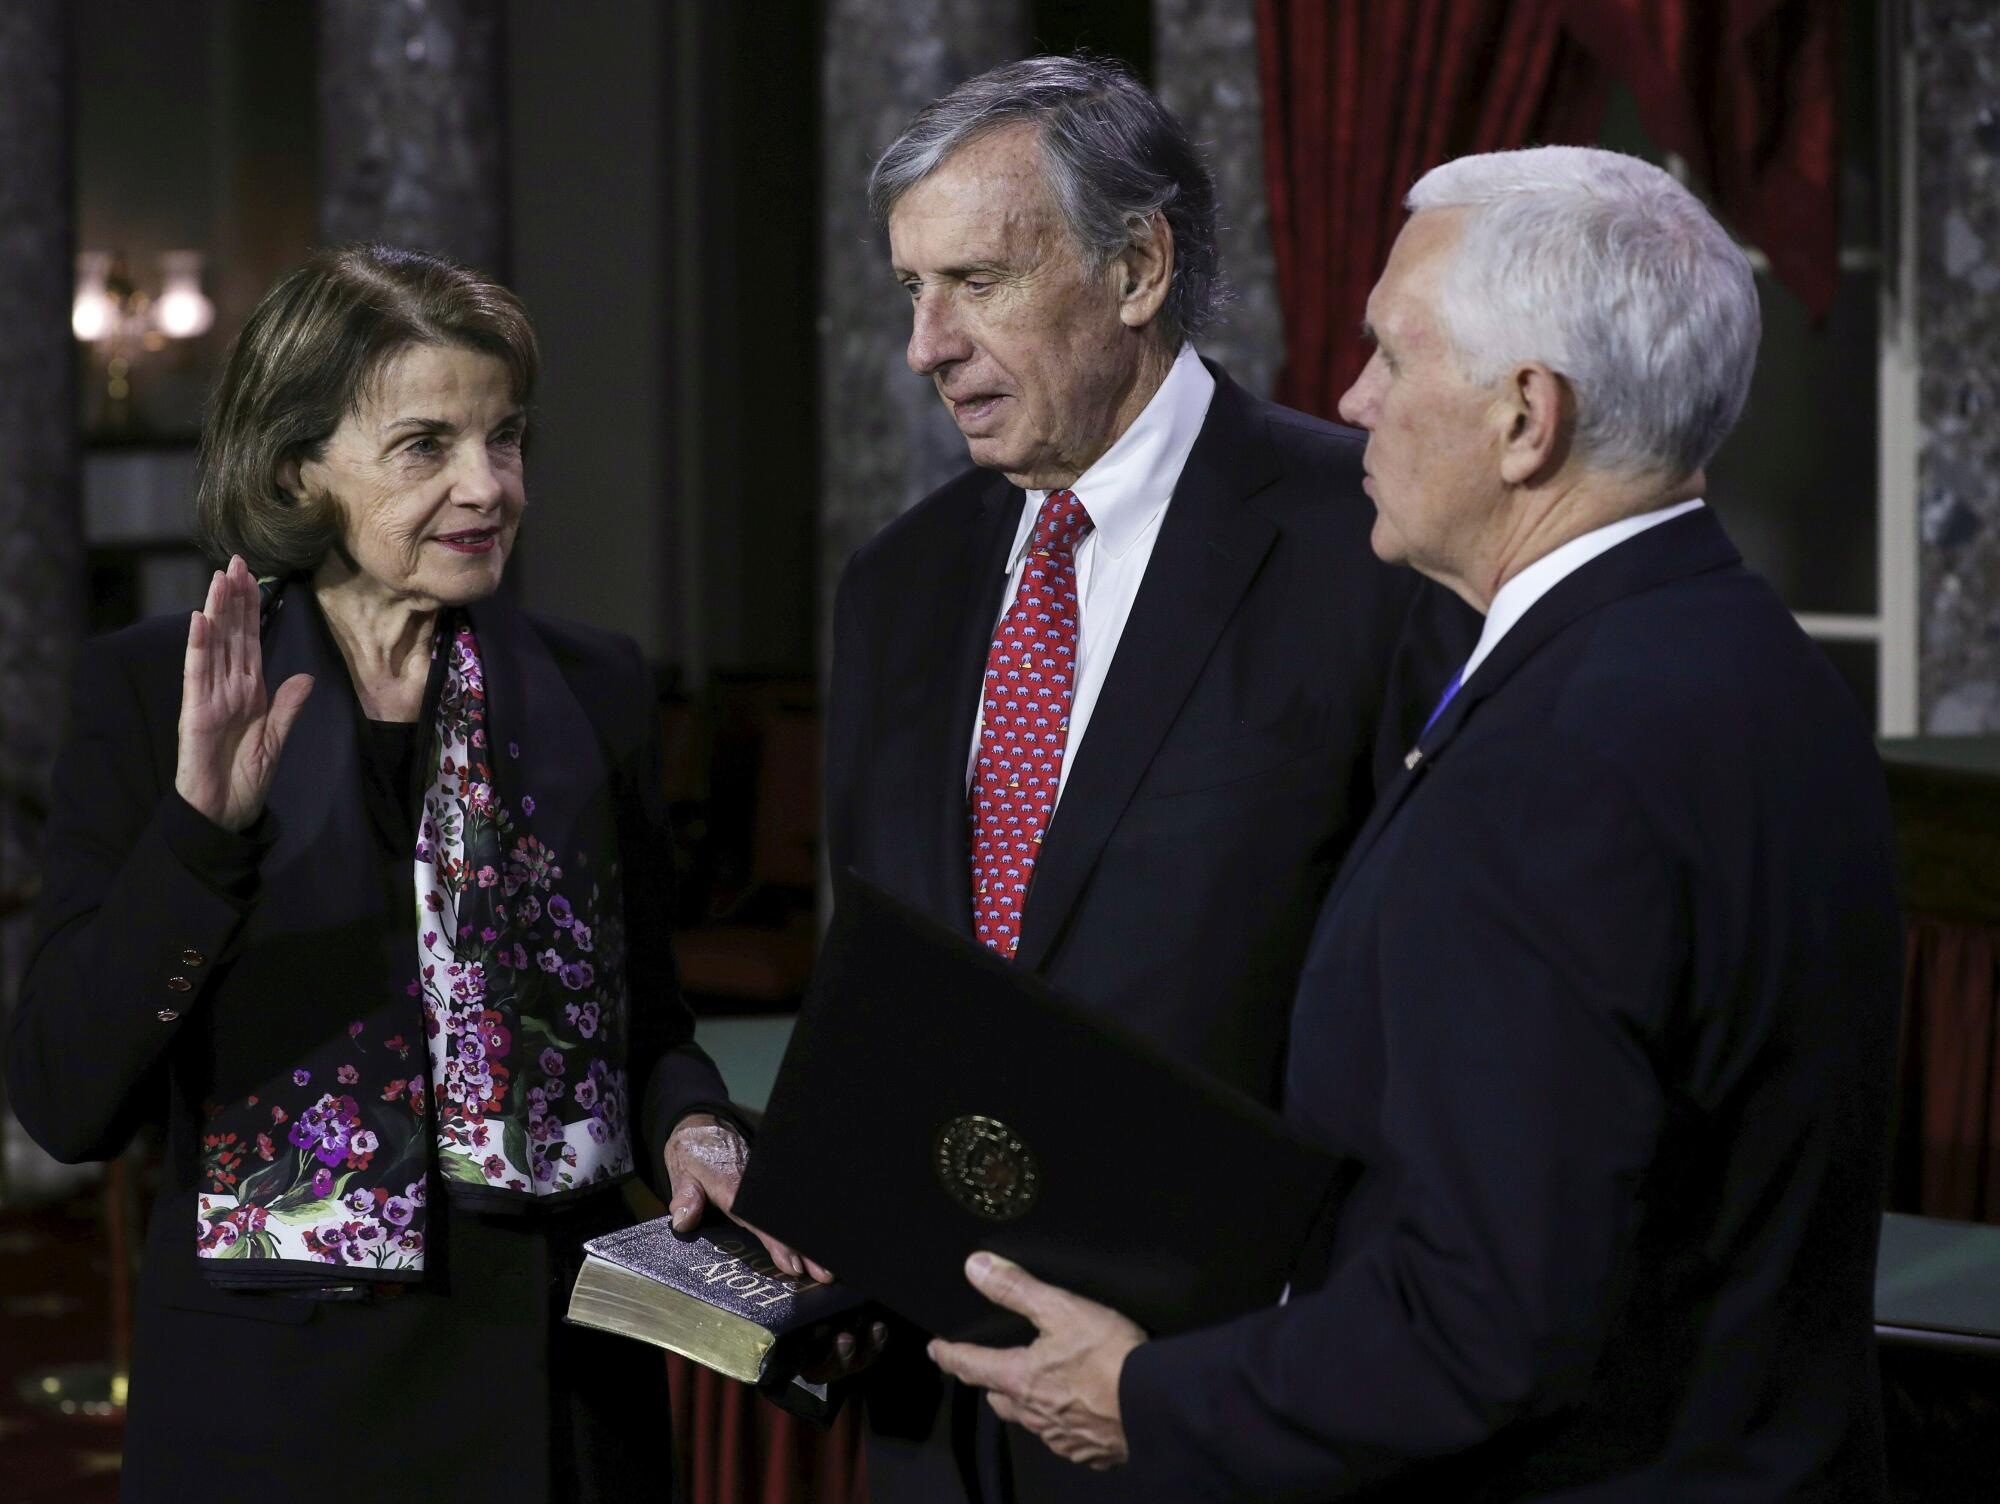 Sen. Dianne Feinstein, standing with husband Richard Blum and Vice President Mike Pence, raises her right hand for an oath